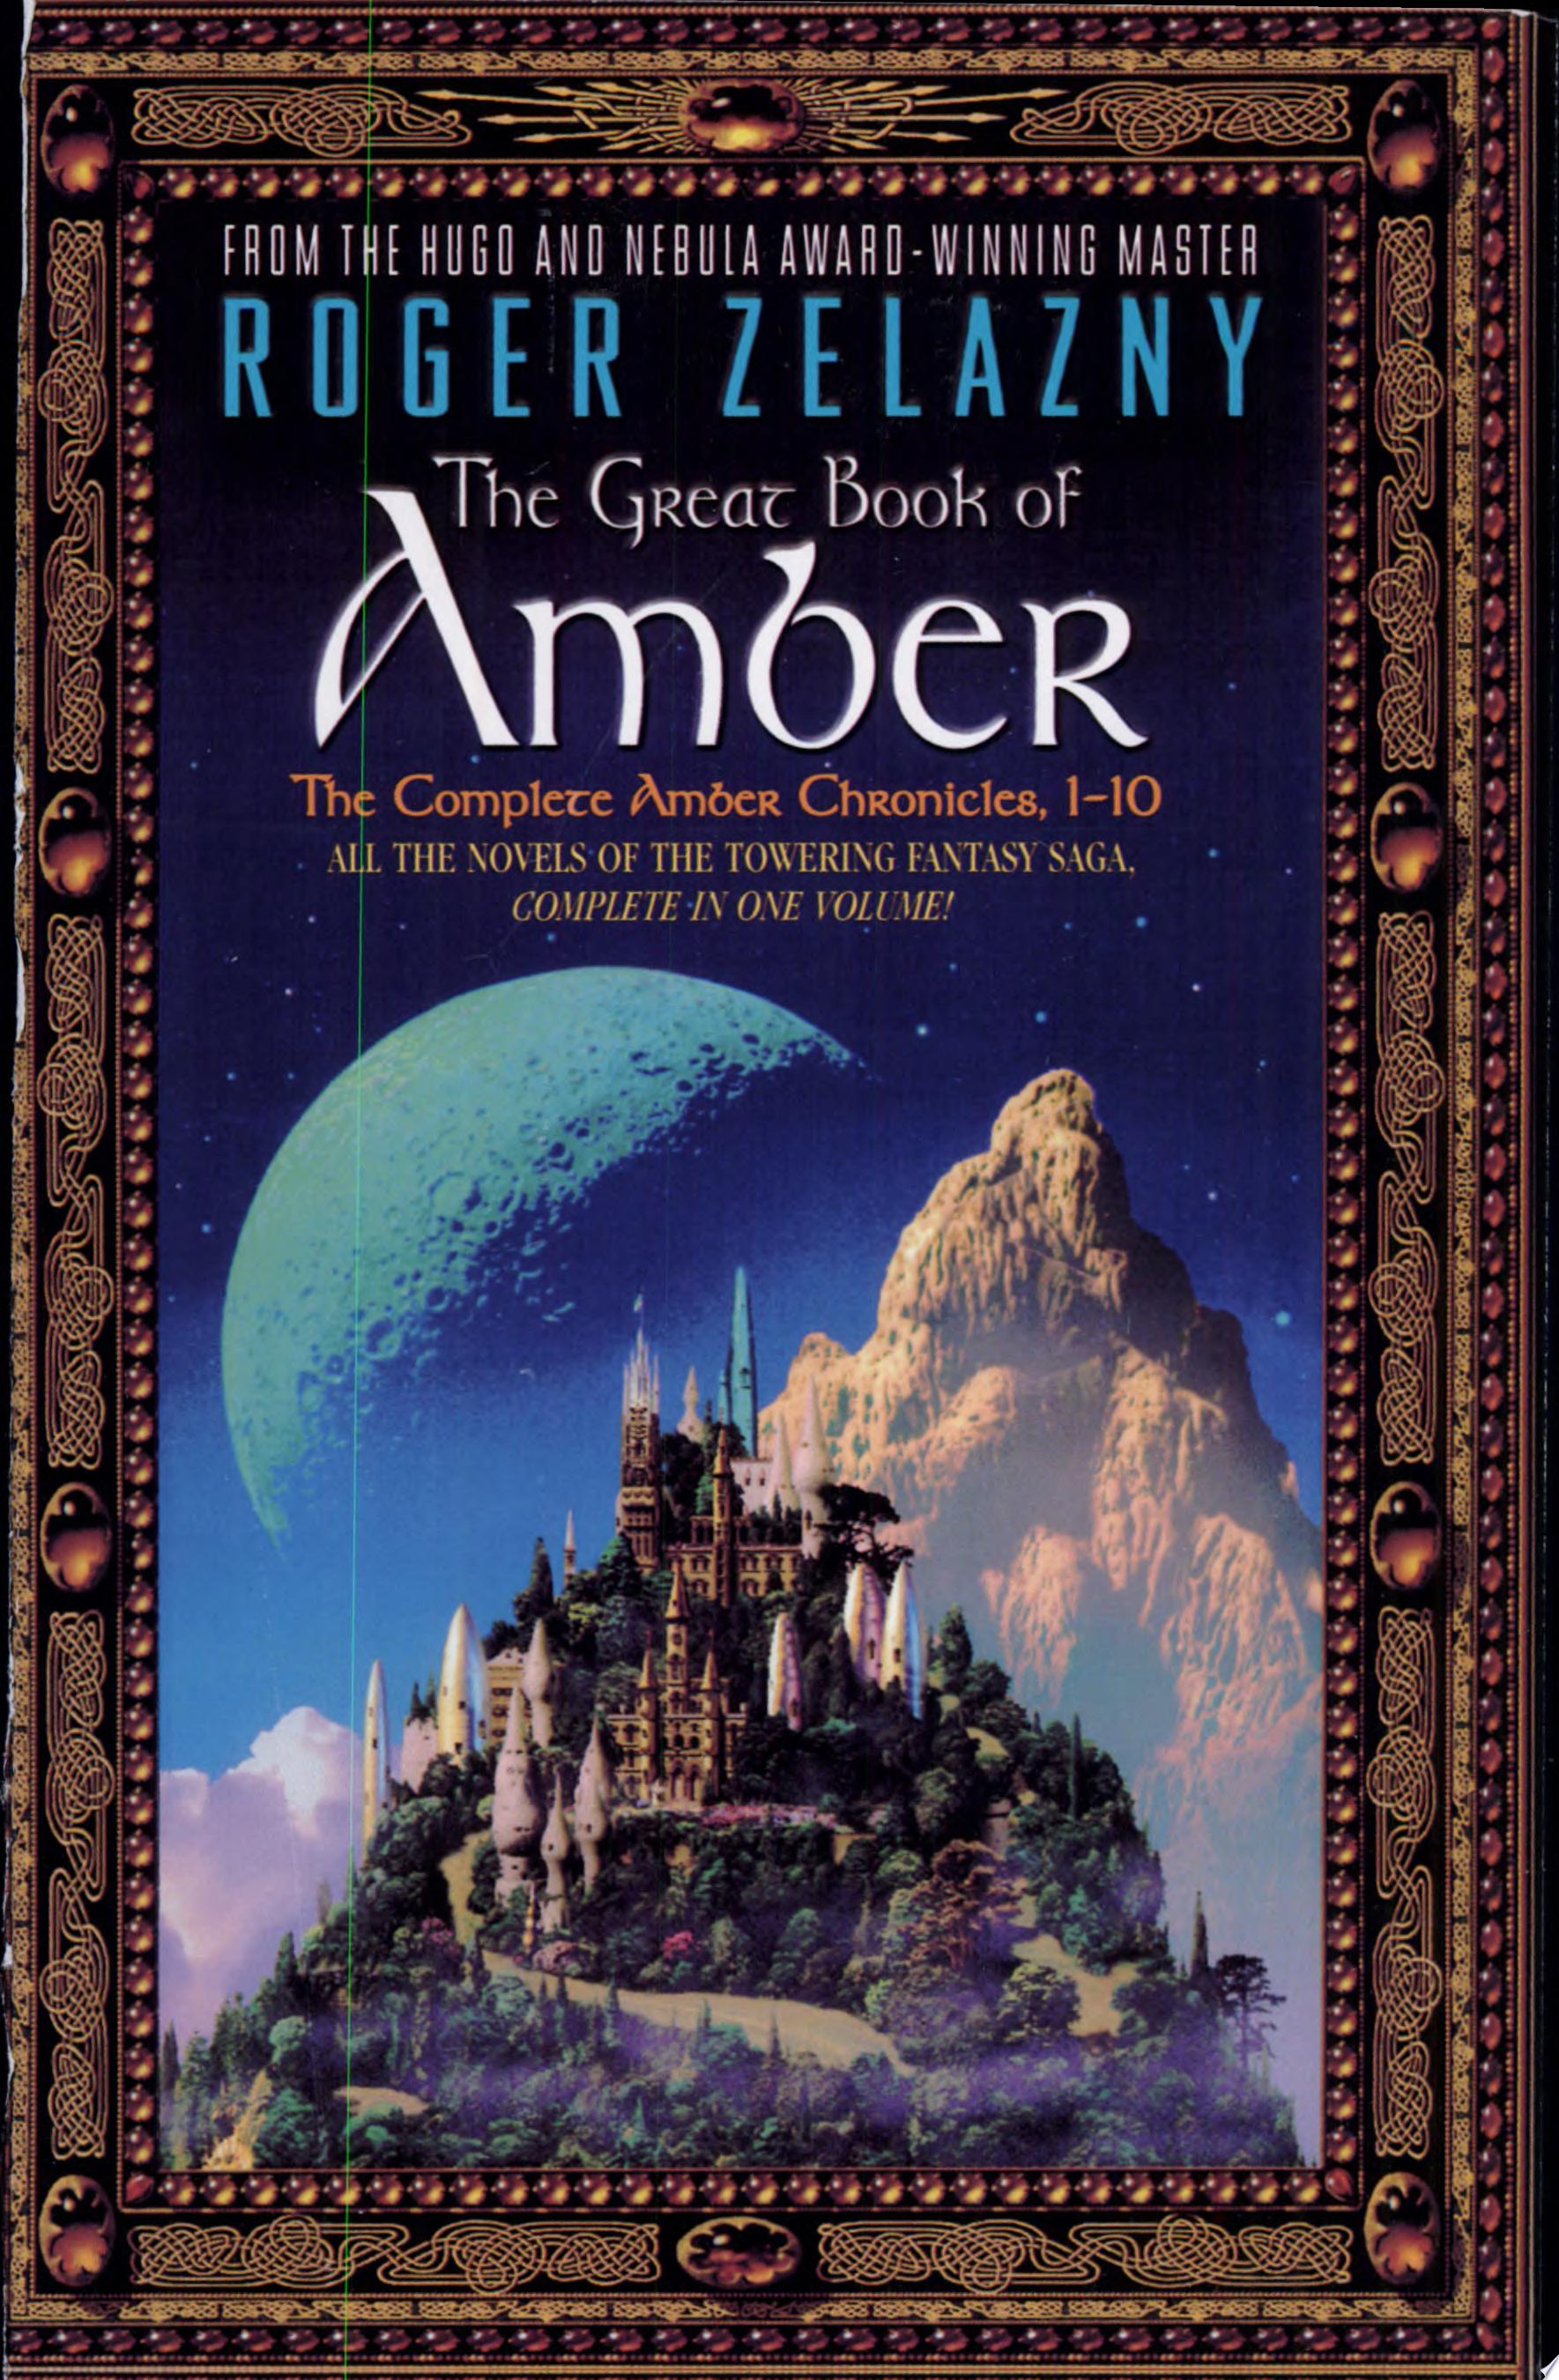 Image for "The Great Book of Amber"